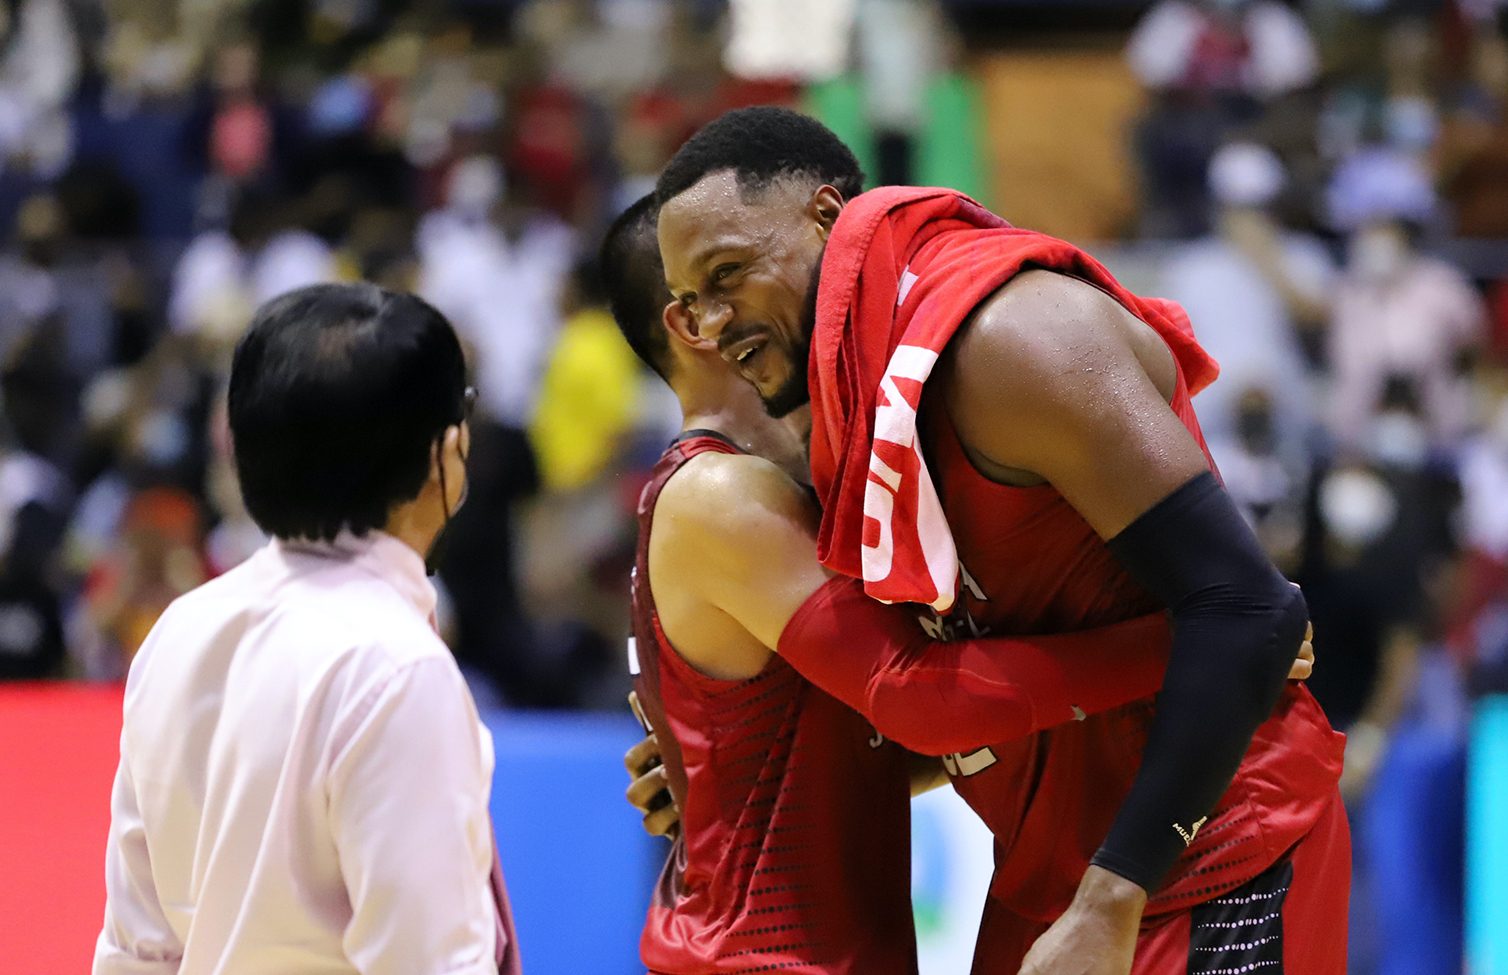 No stopping Brownlee: Cone says top import ‘continues to evolve’